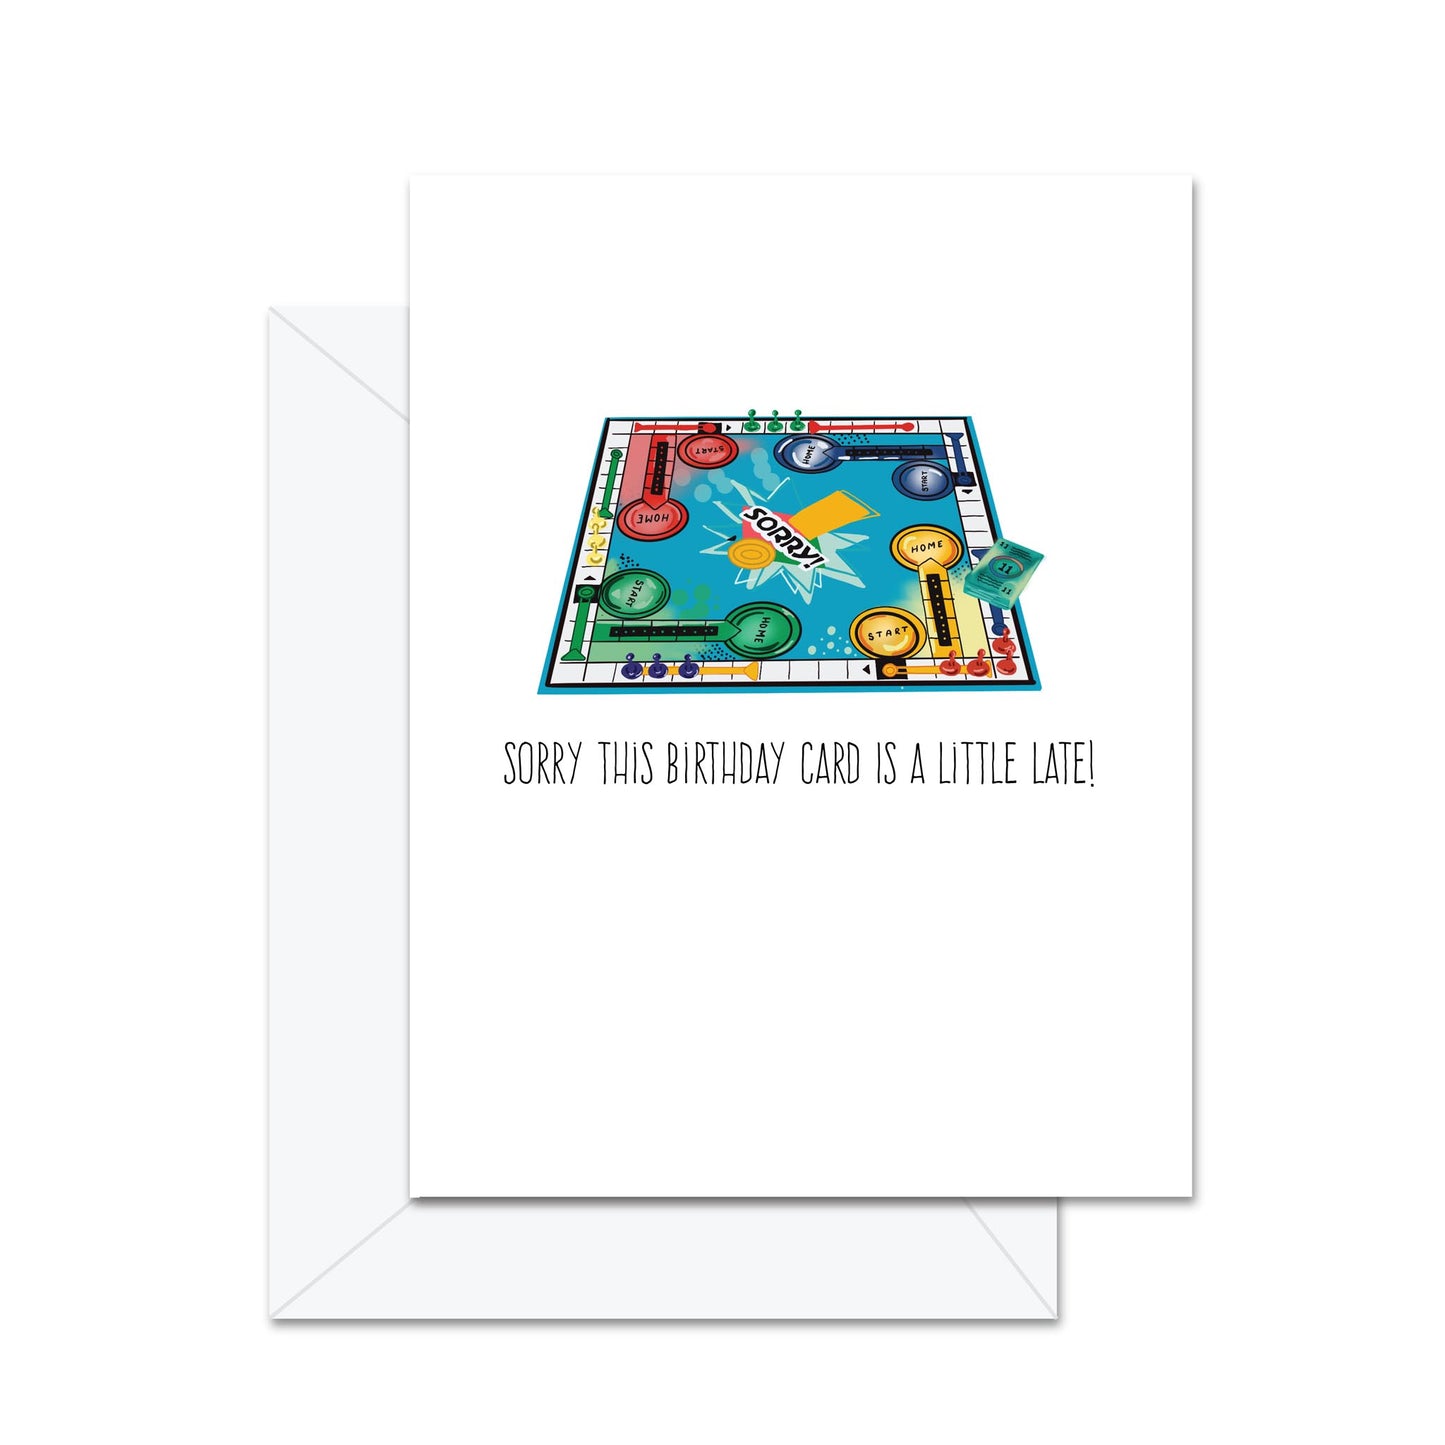 Sorry This Card Is A Little Late! - Greeting Card